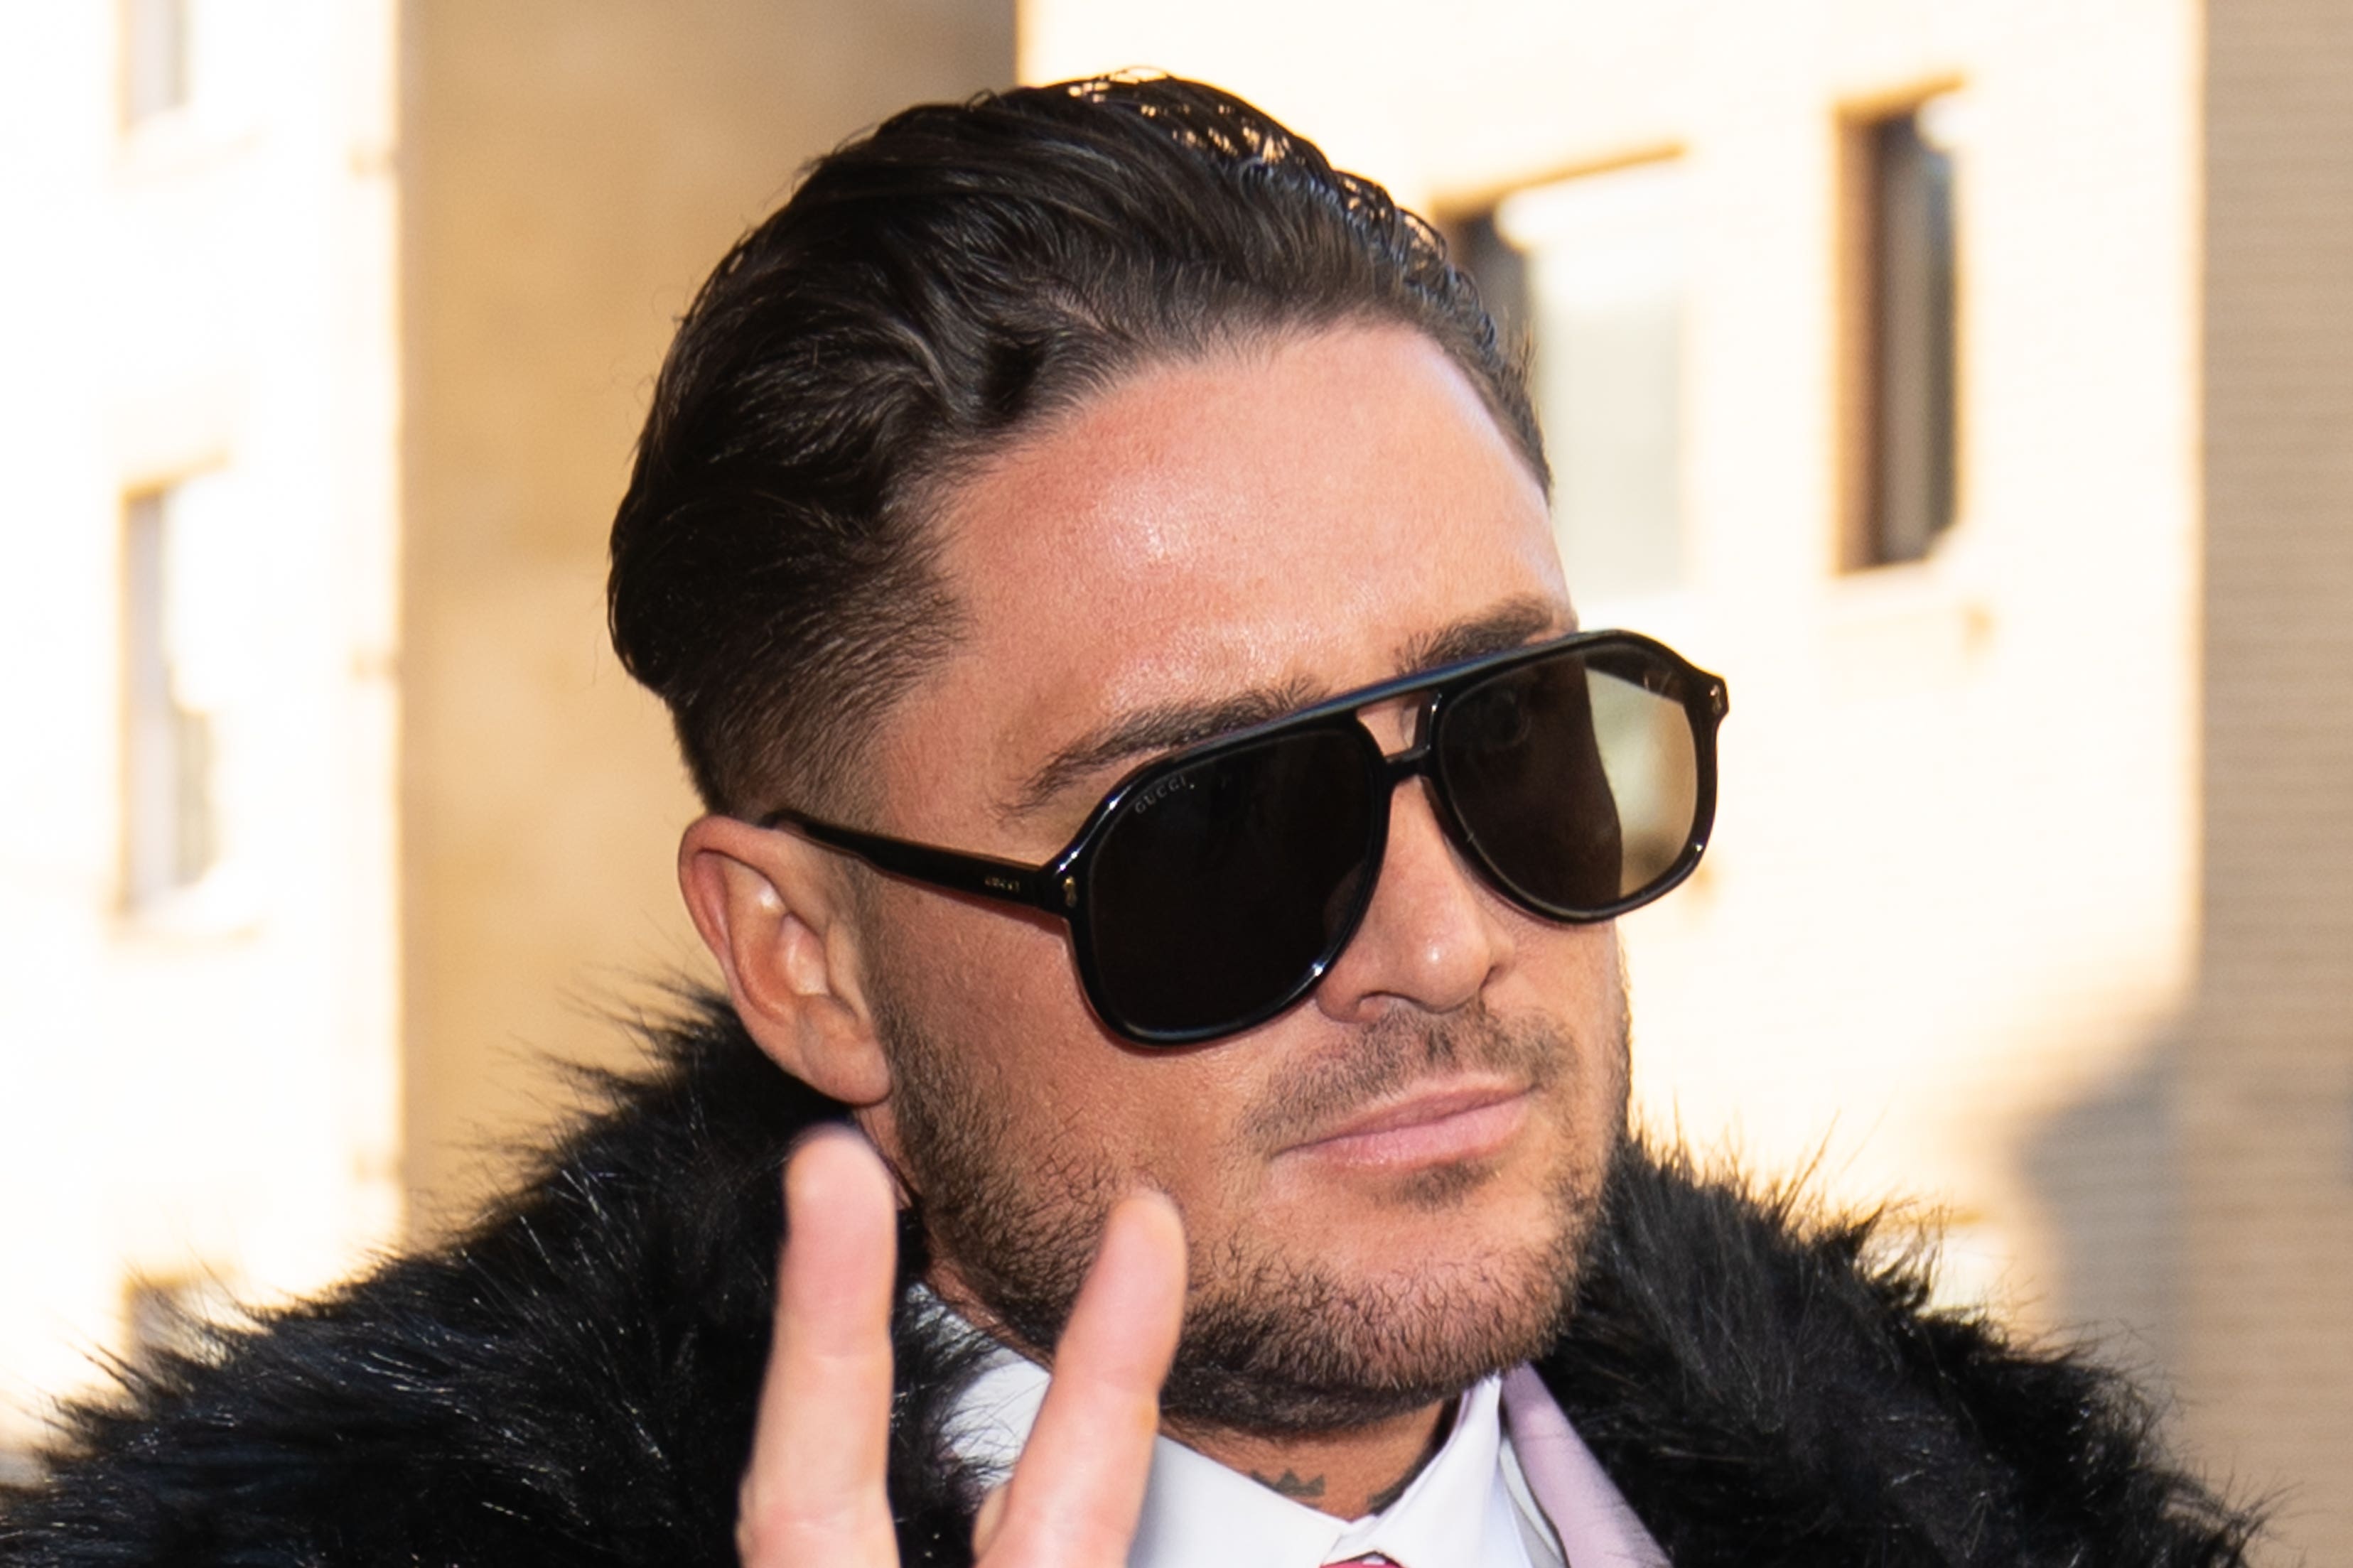 Reality TV star Stephen Bear tells court he deleted sex video of himself and ex The Independent